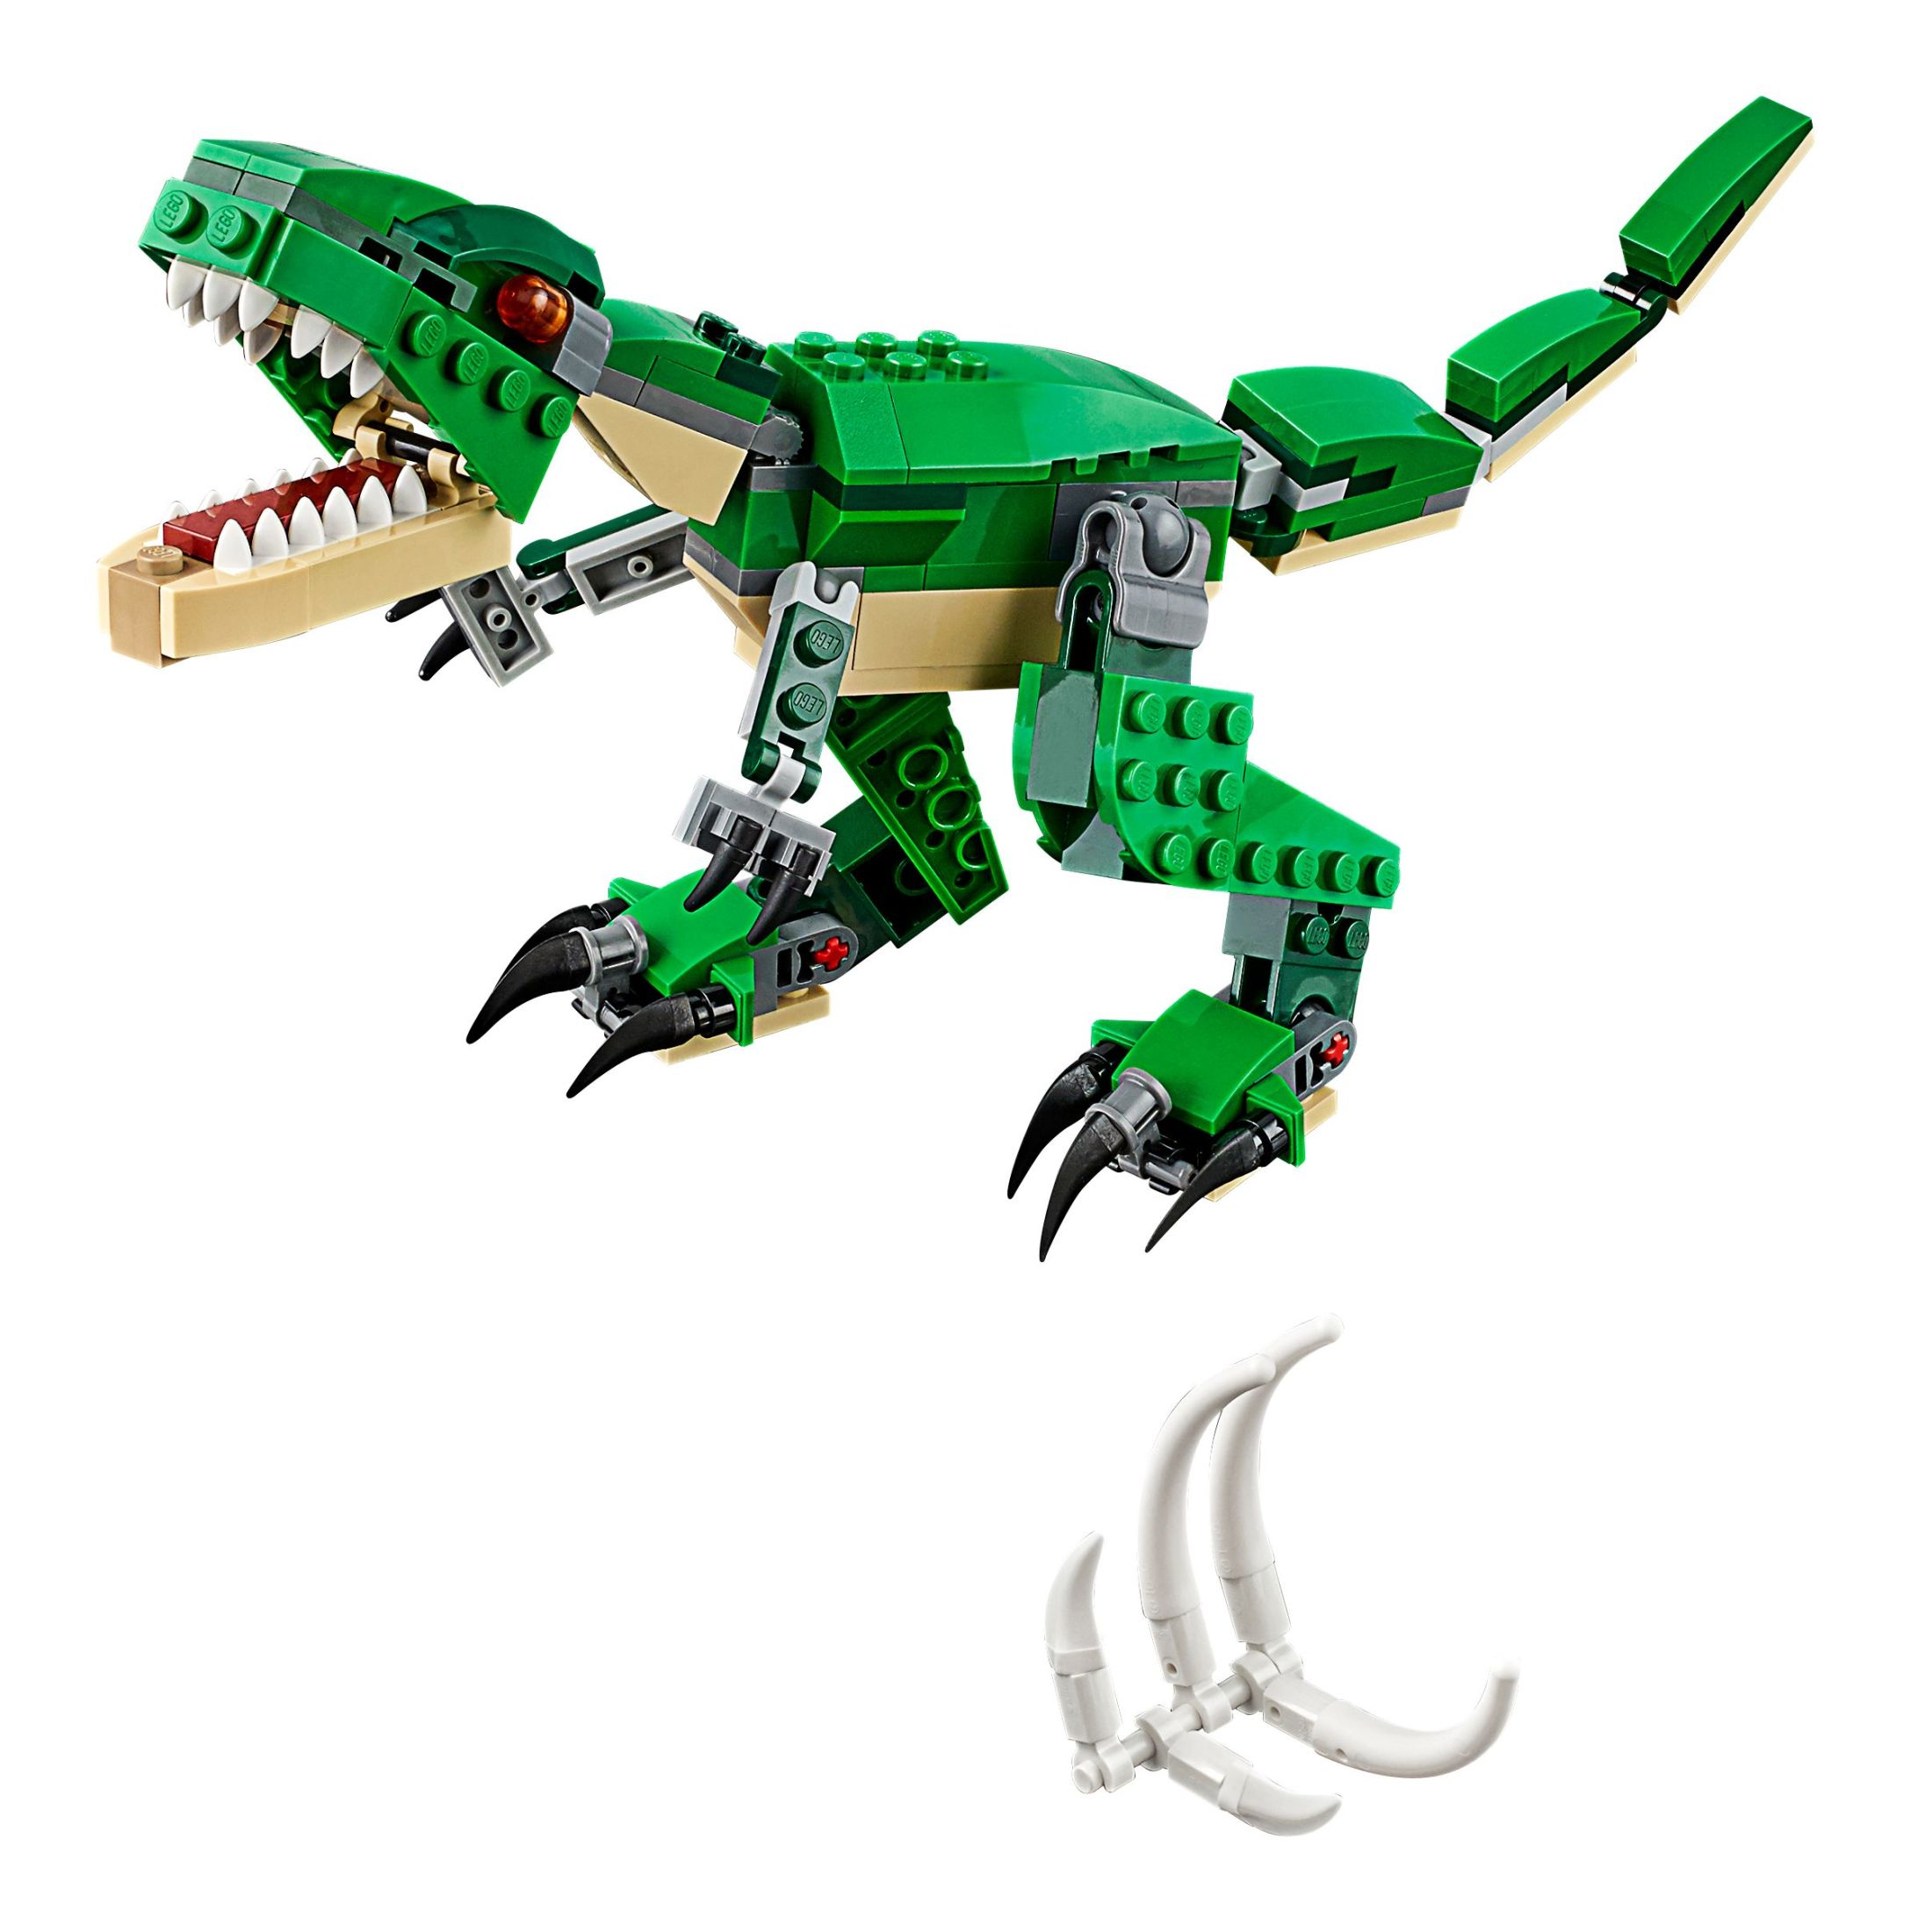 LEGO Creator 3 in 1 Mighty Dinosaur Toy, Transforms from T. rex to Triceratops to Pterodactyl Dinosaur Figures, Great Gift for 7 - 12 Year Old Boys & Girls, 31058 - image 3 of 6